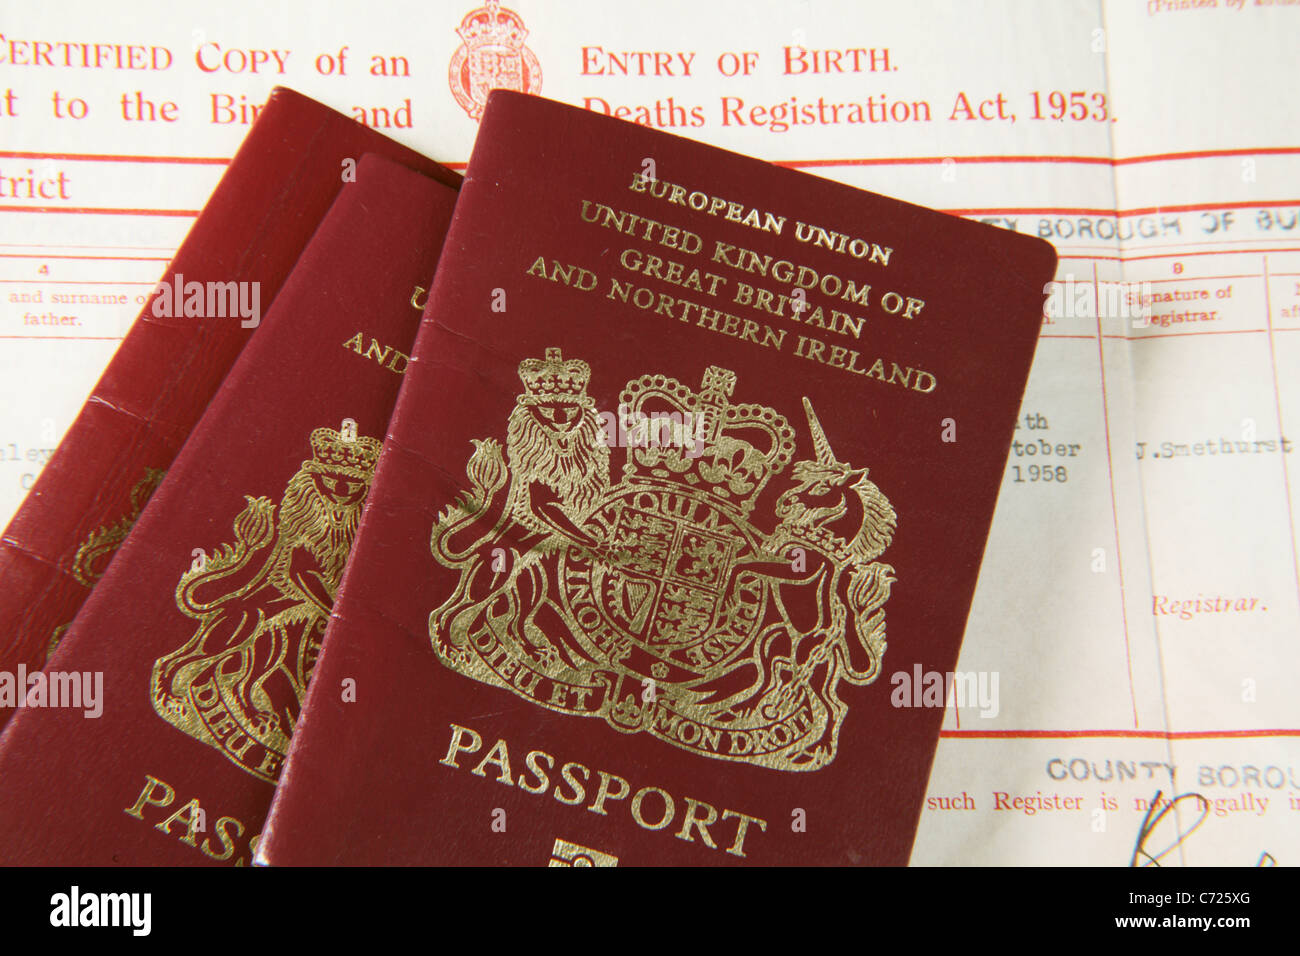 UK Passports and Birth Certificate; Illegal Immigration and Forgery Concept Stock Photo